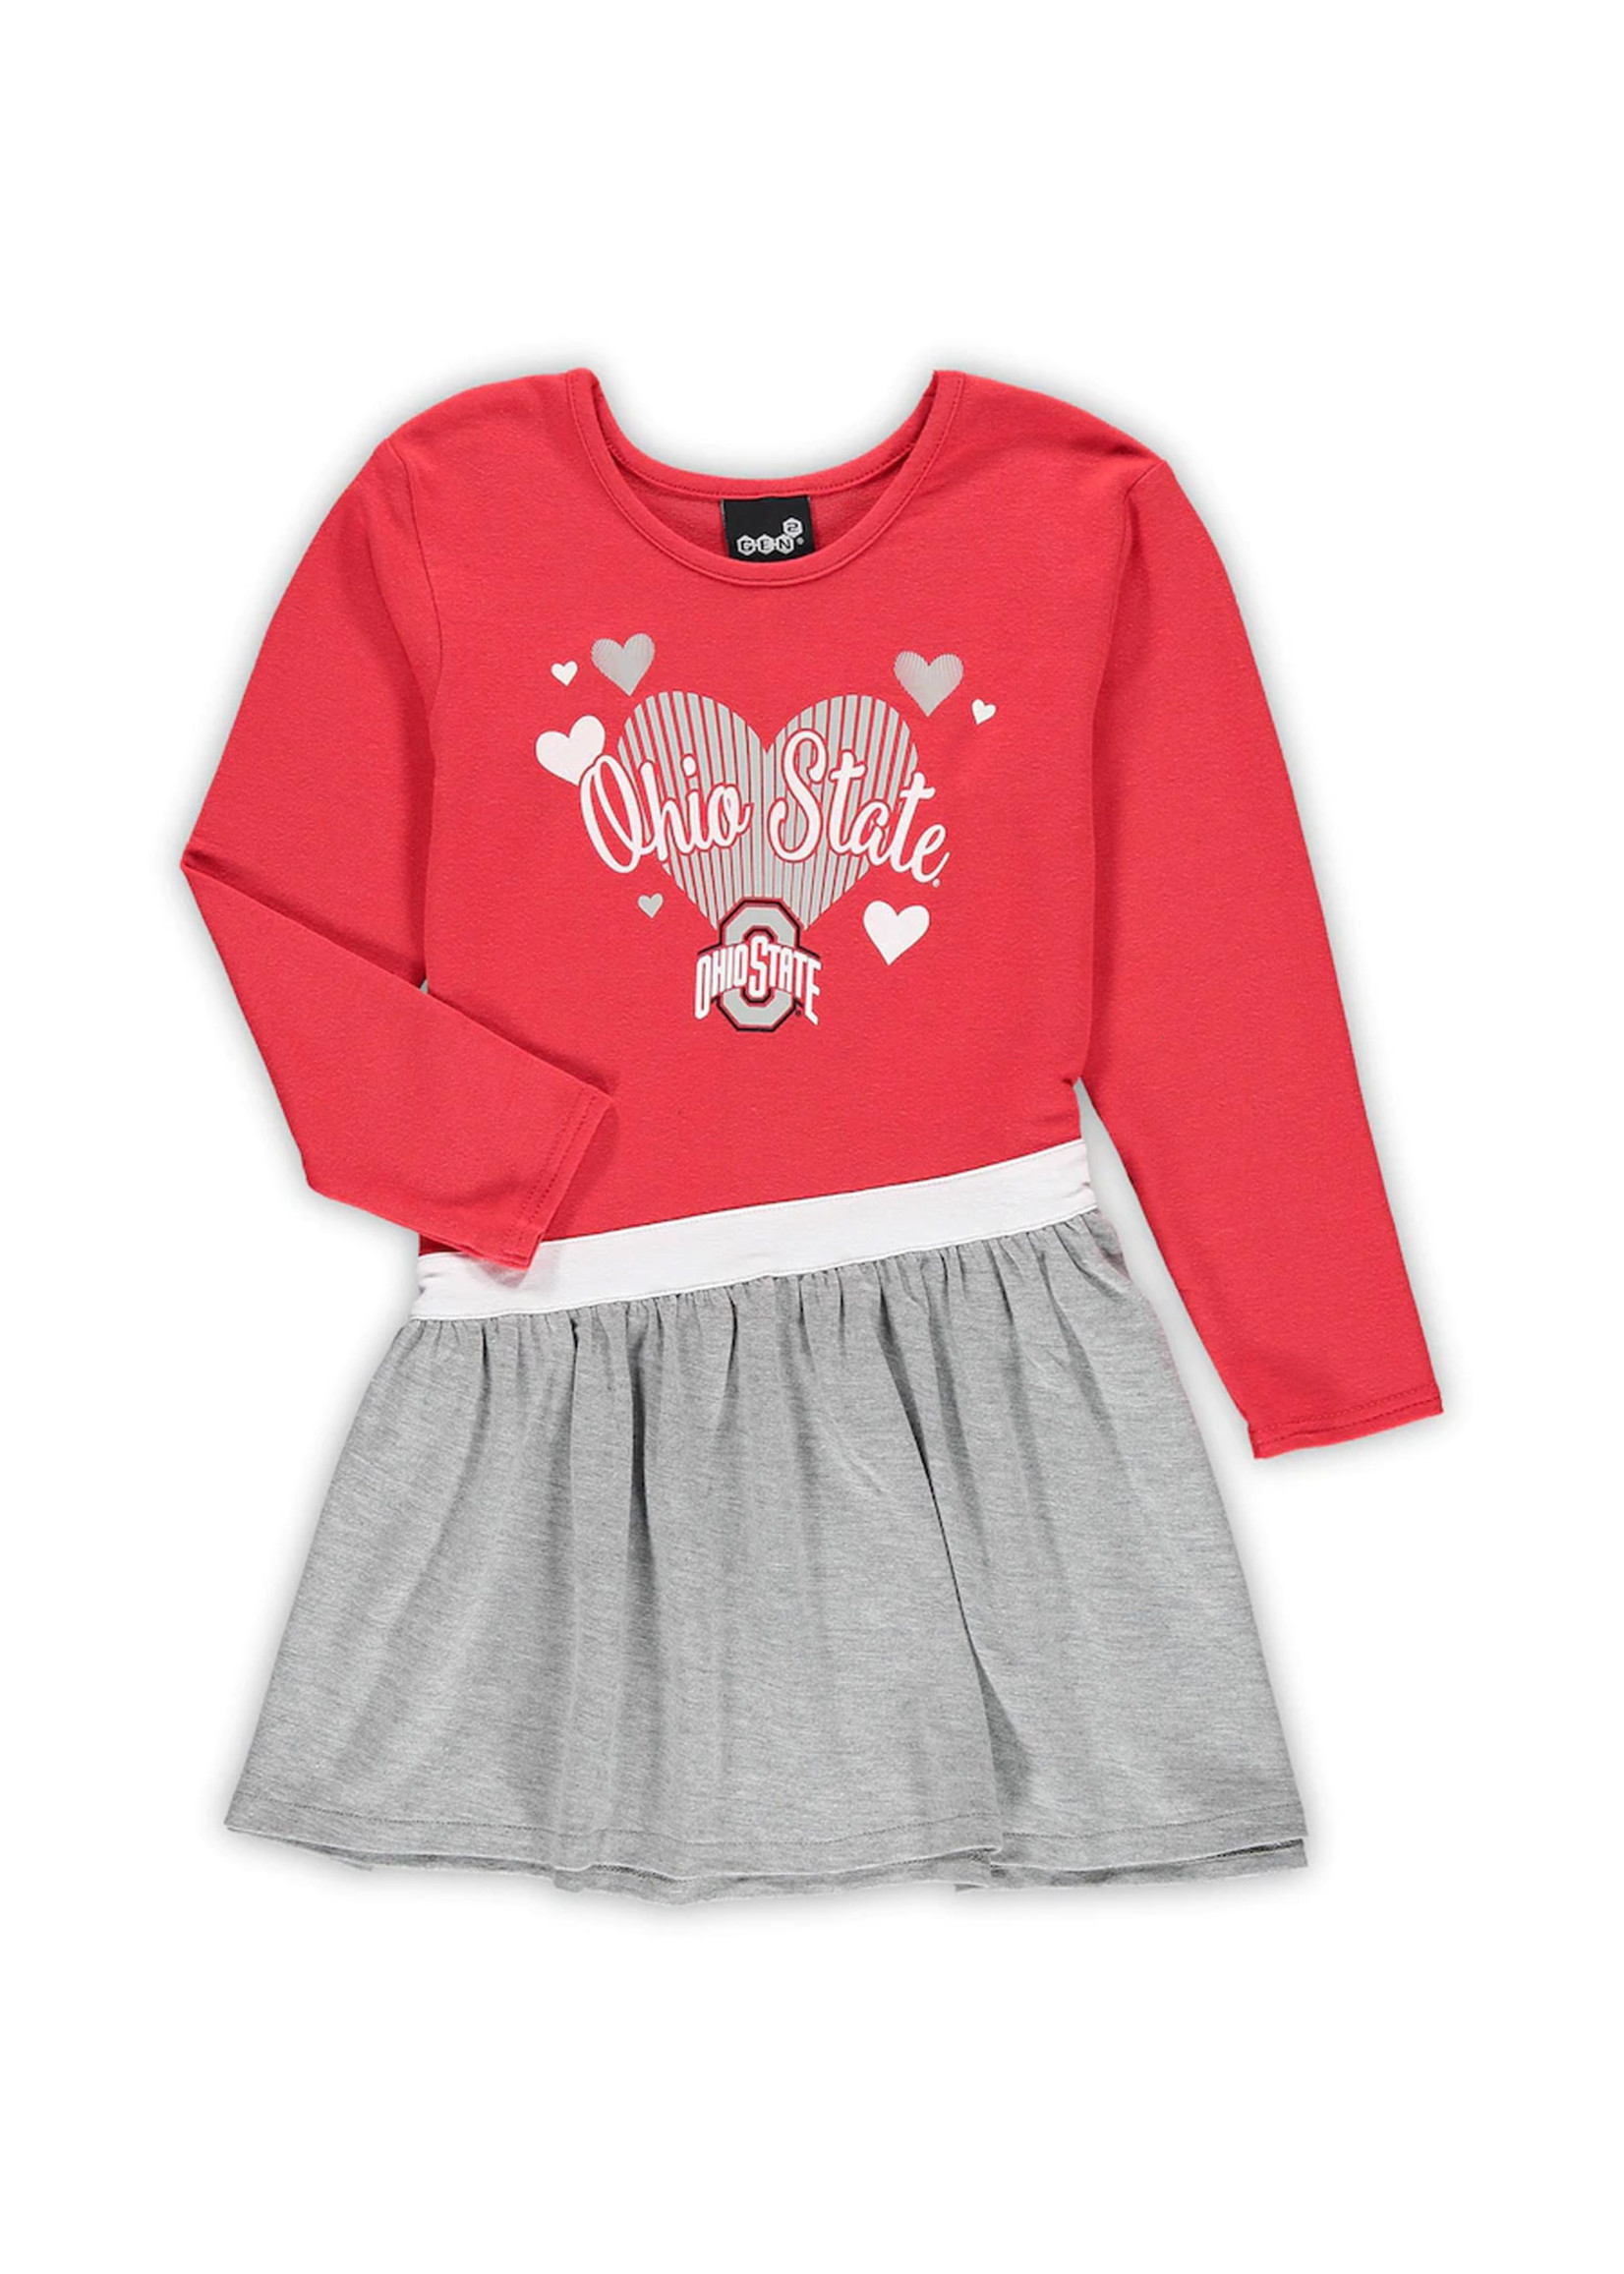 Ohio State Buckeyes Toddler Heart French Terry Dress